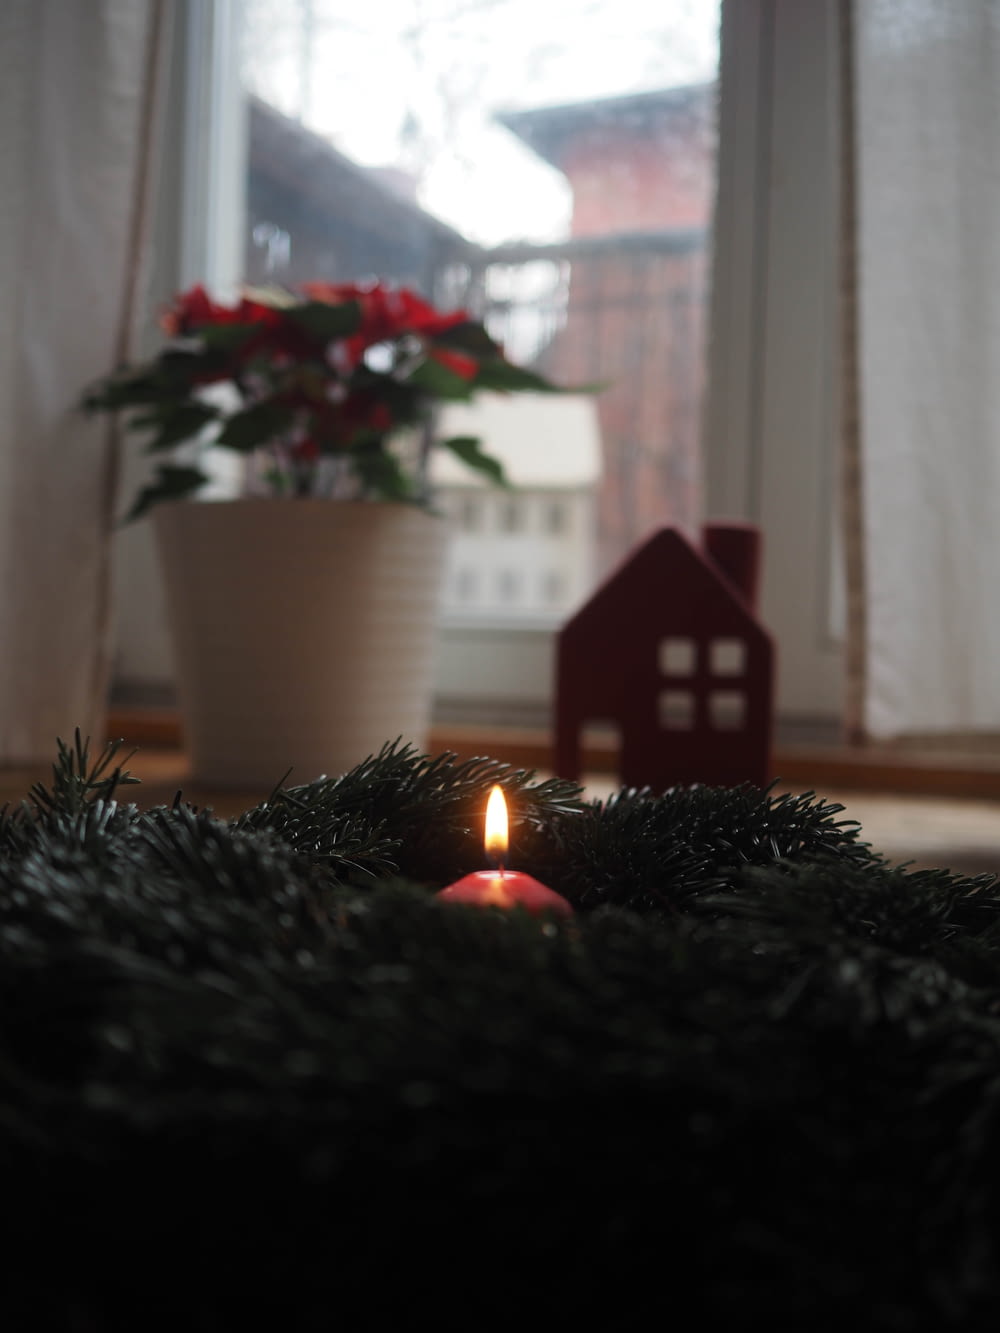 a lit candle on the floor in front of a window